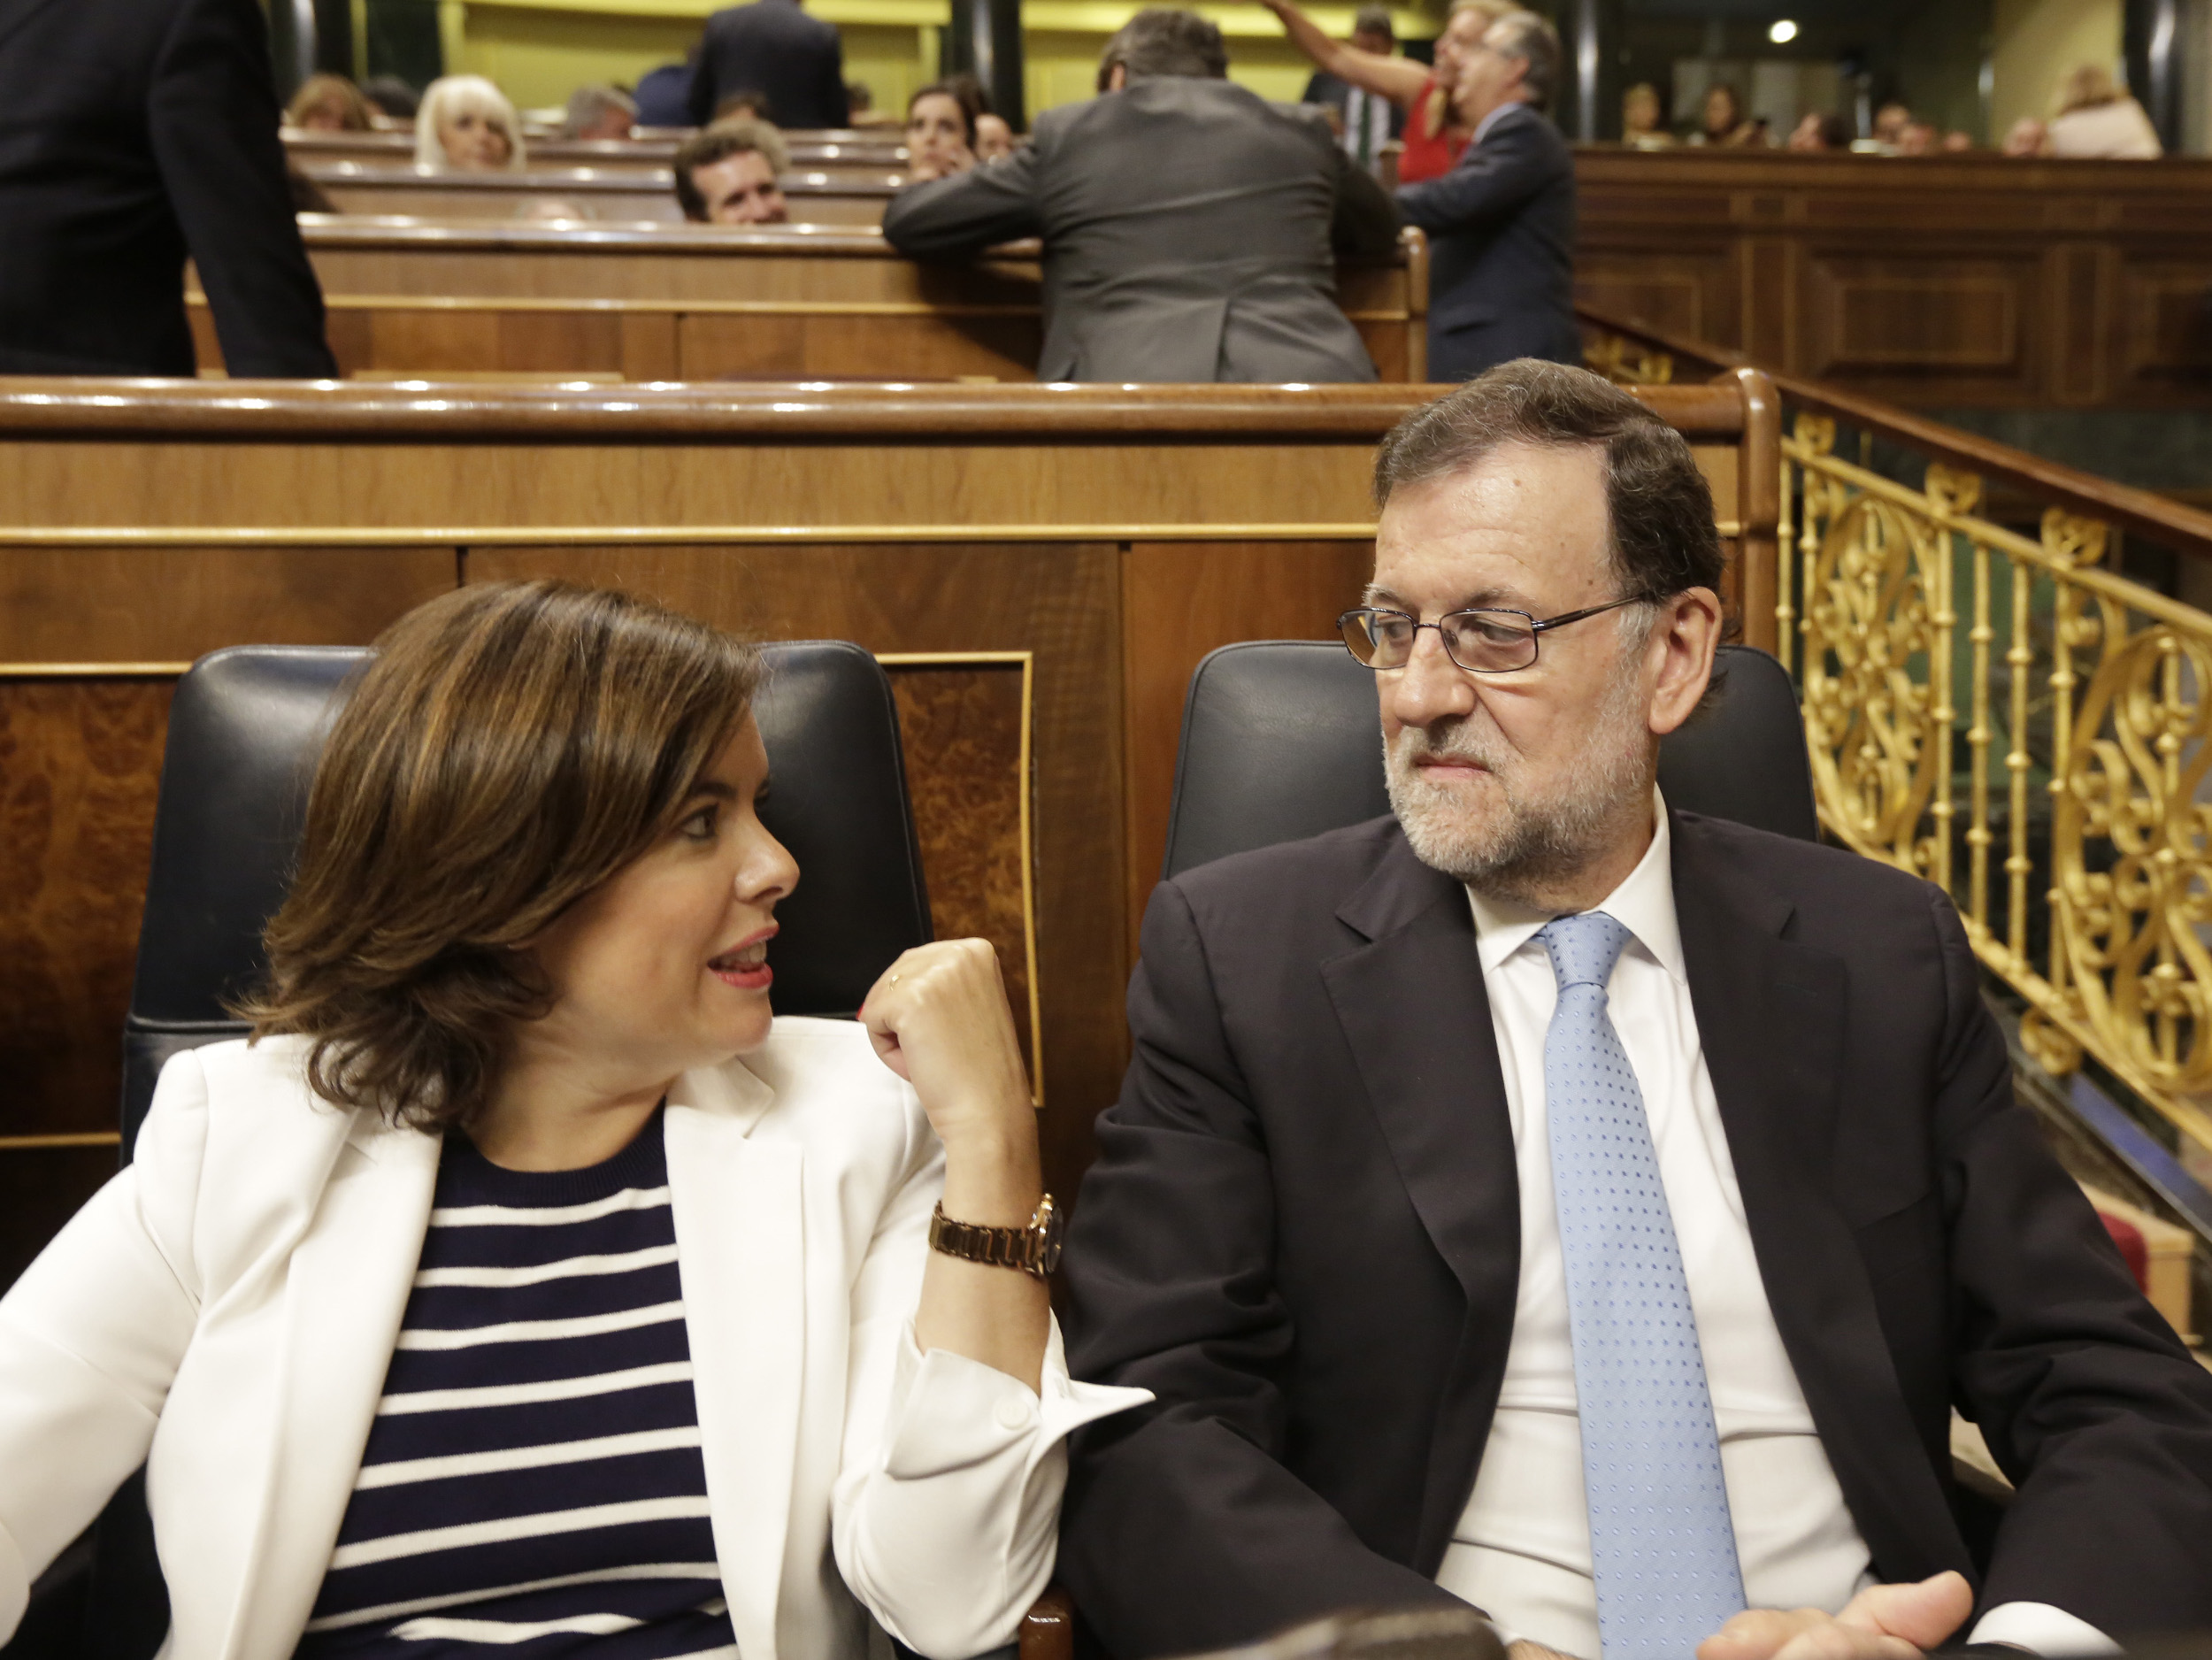 Current Spanish President, Mariano Rajoy, joined by Current Spanish Vice President, Soraya Sáenz de Santamaría (by ACN)